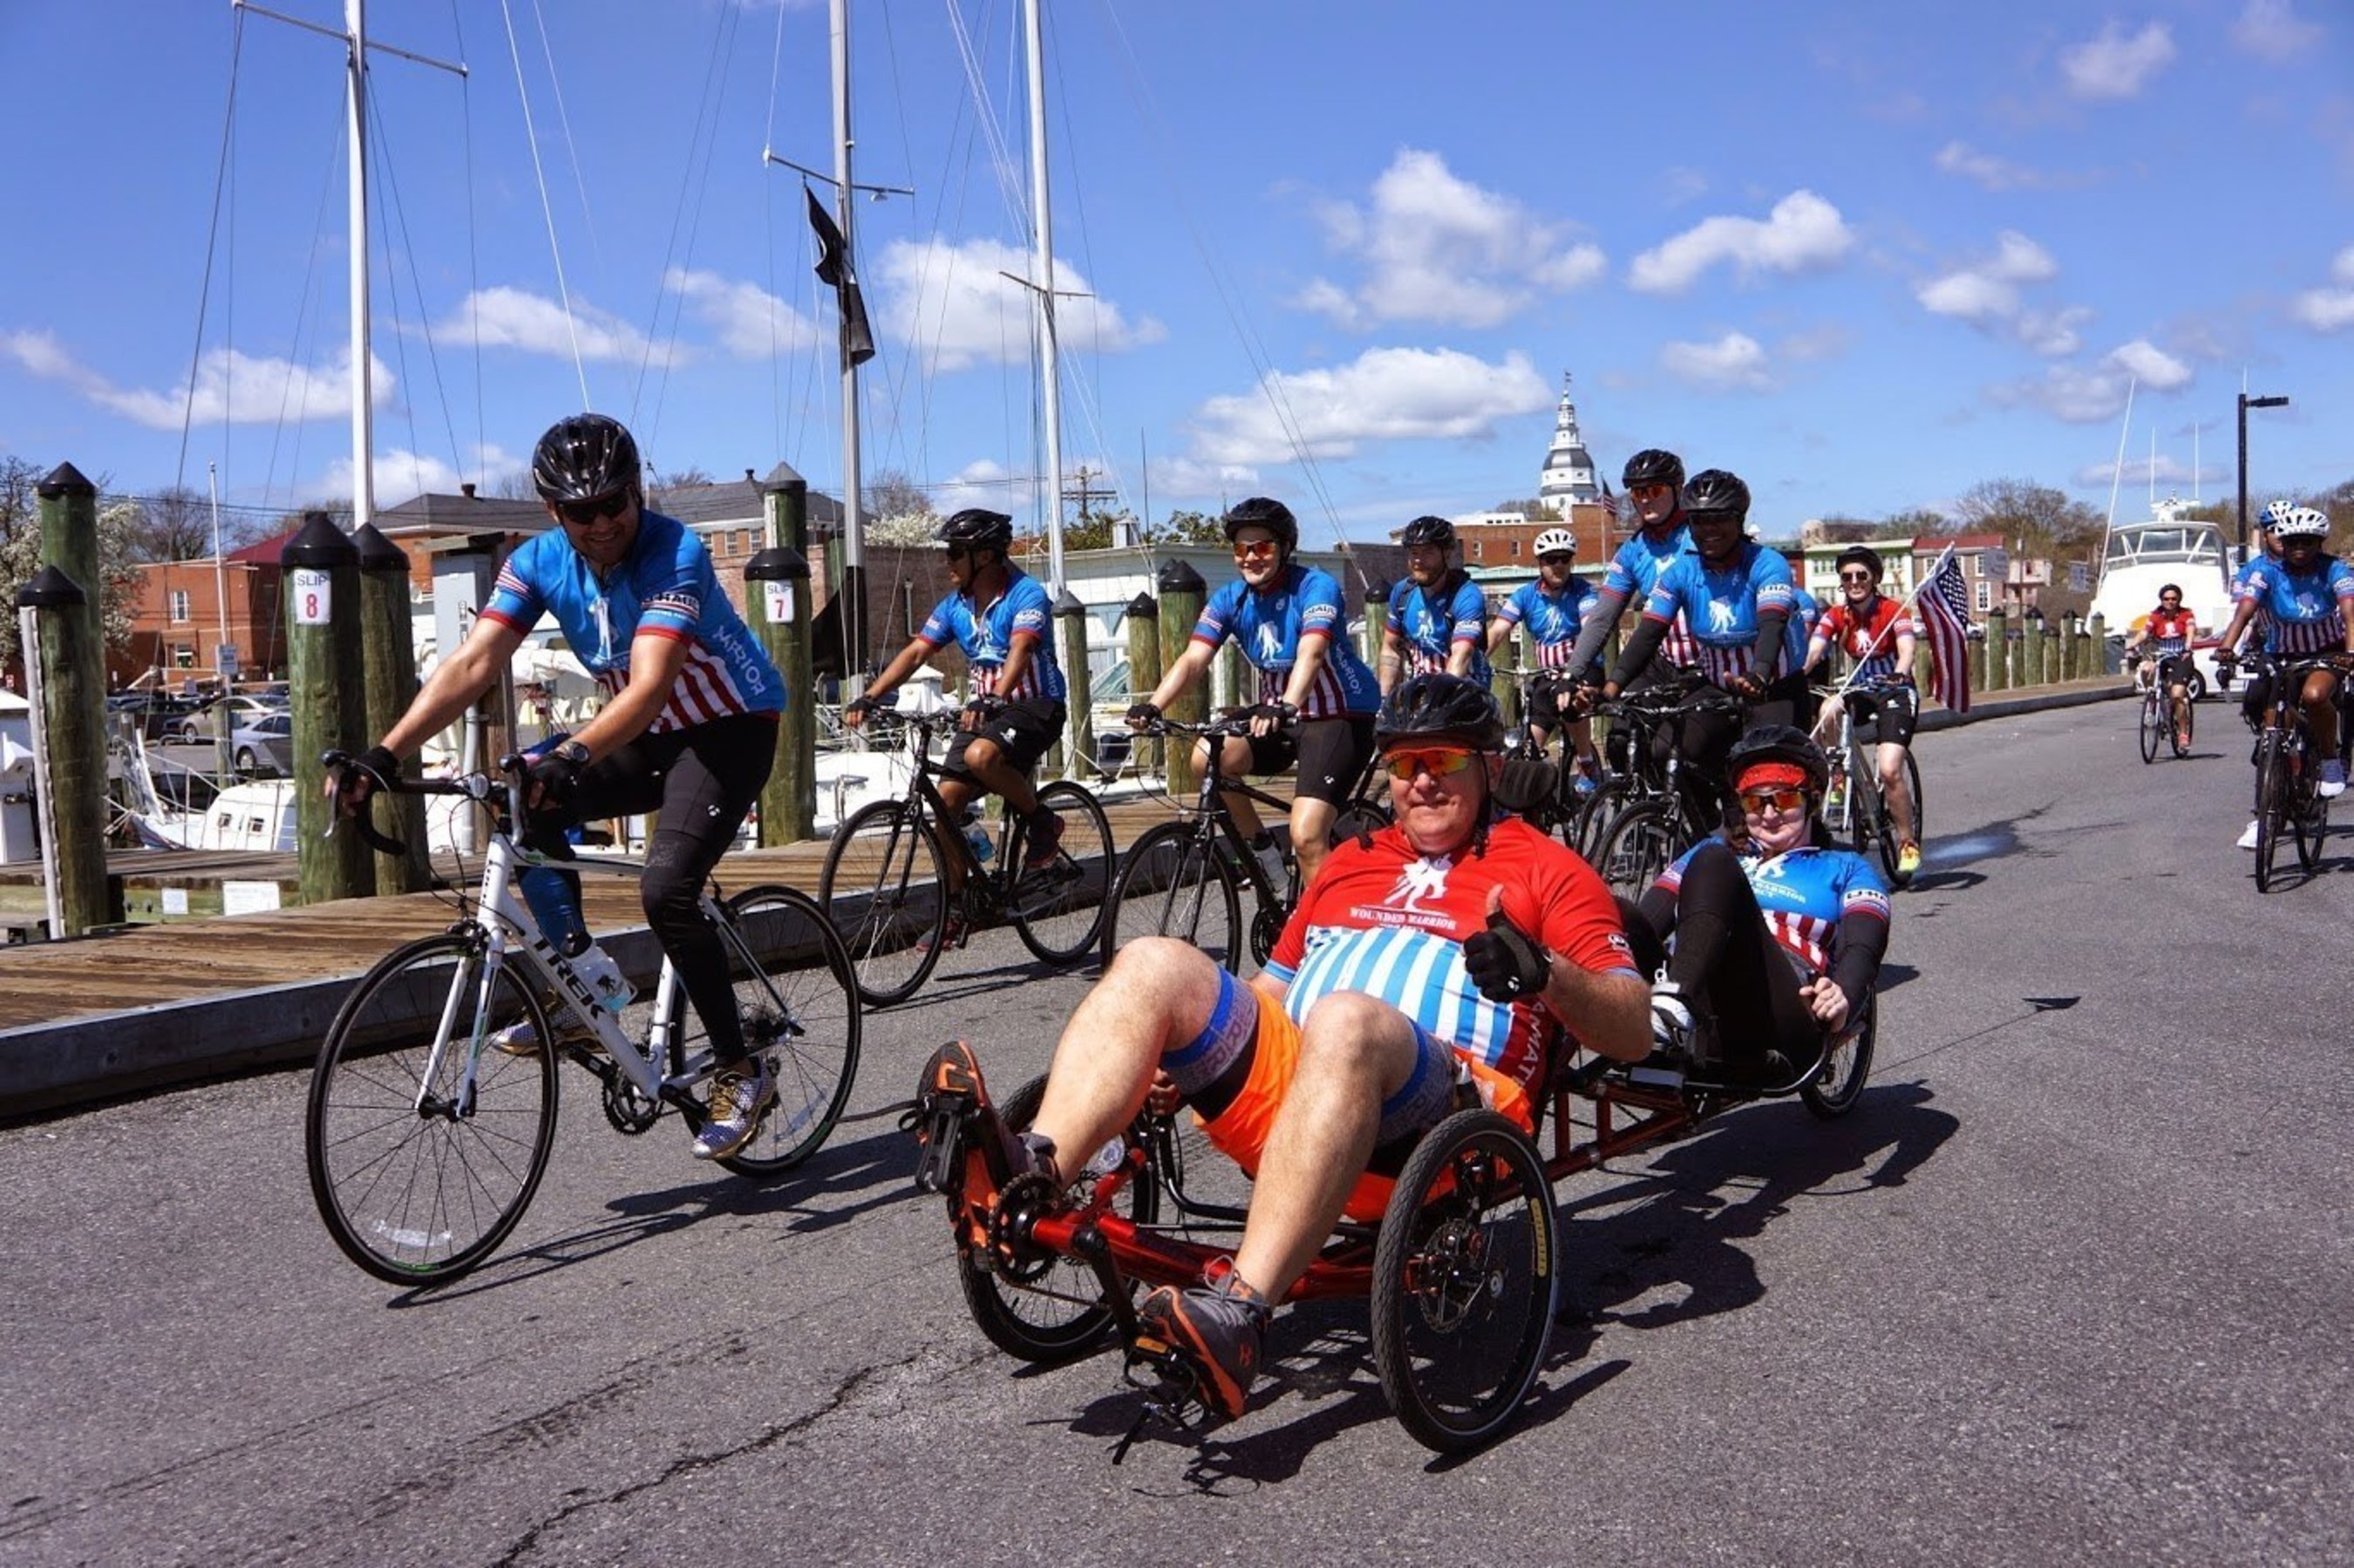 Wounded Warrior Project Soldier Ride Event Comes to the Nation's